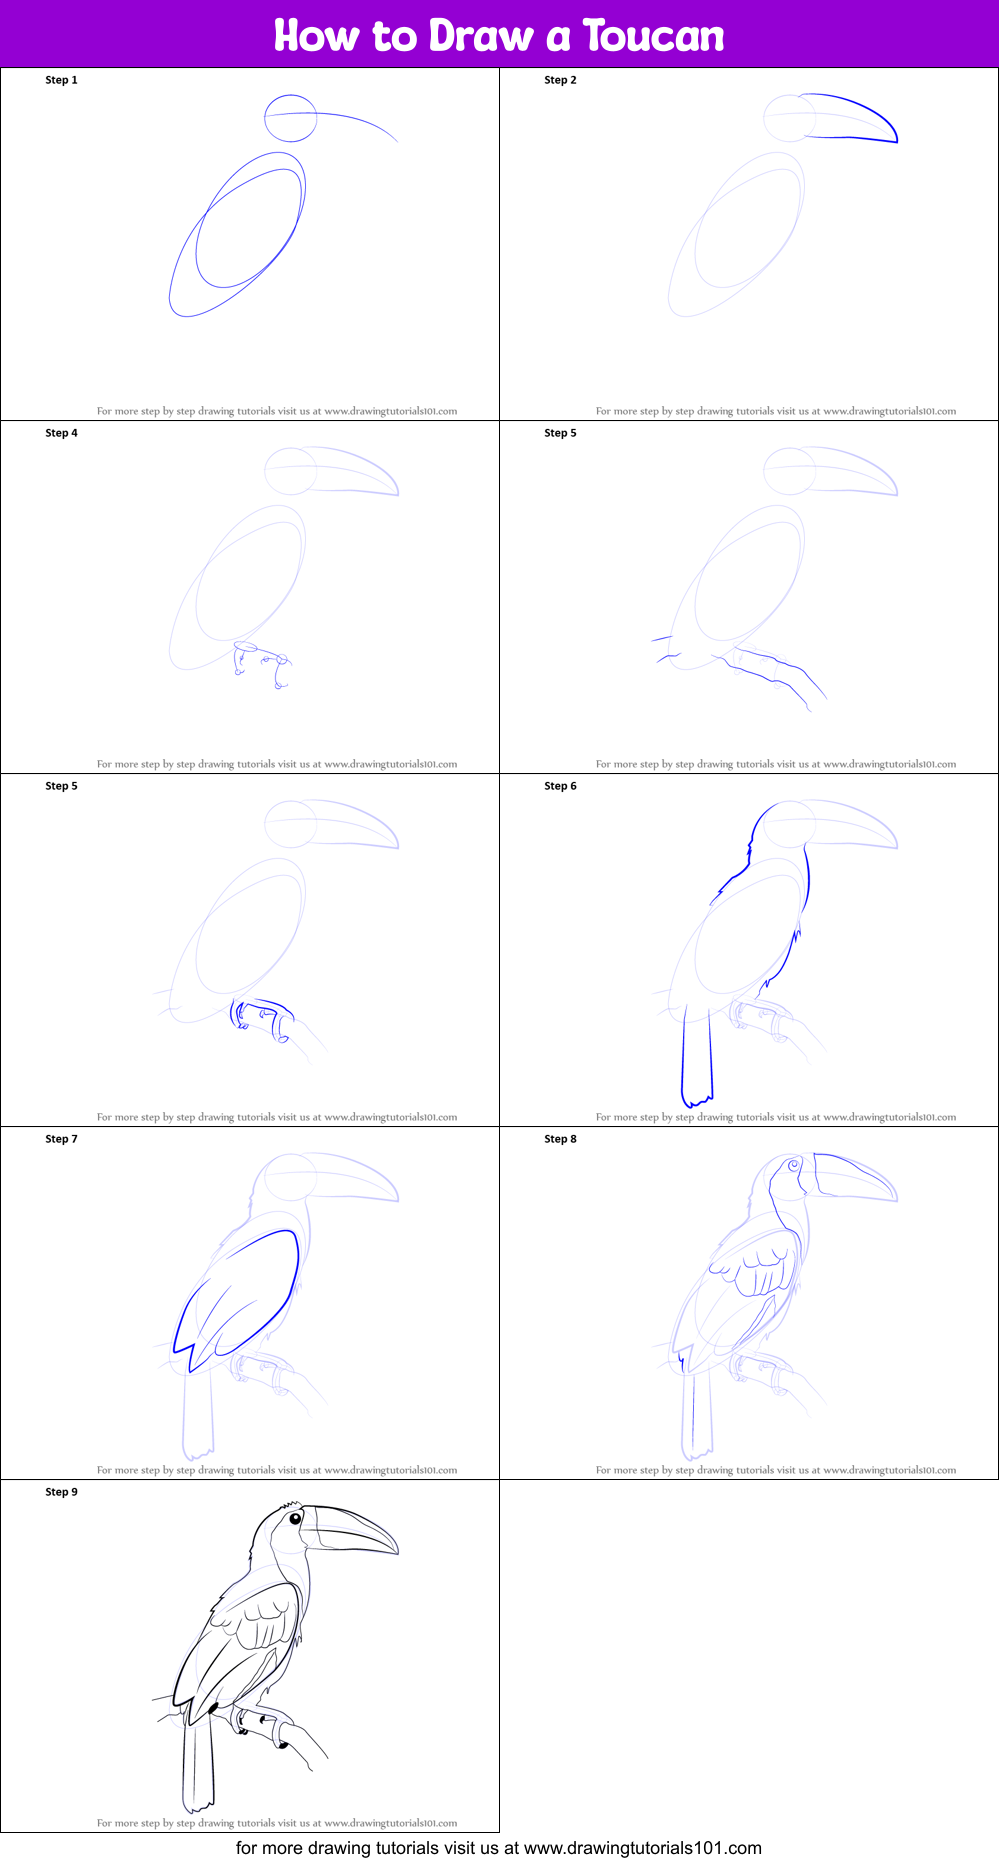 How to Draw a Toucan printable step by step drawing sheet